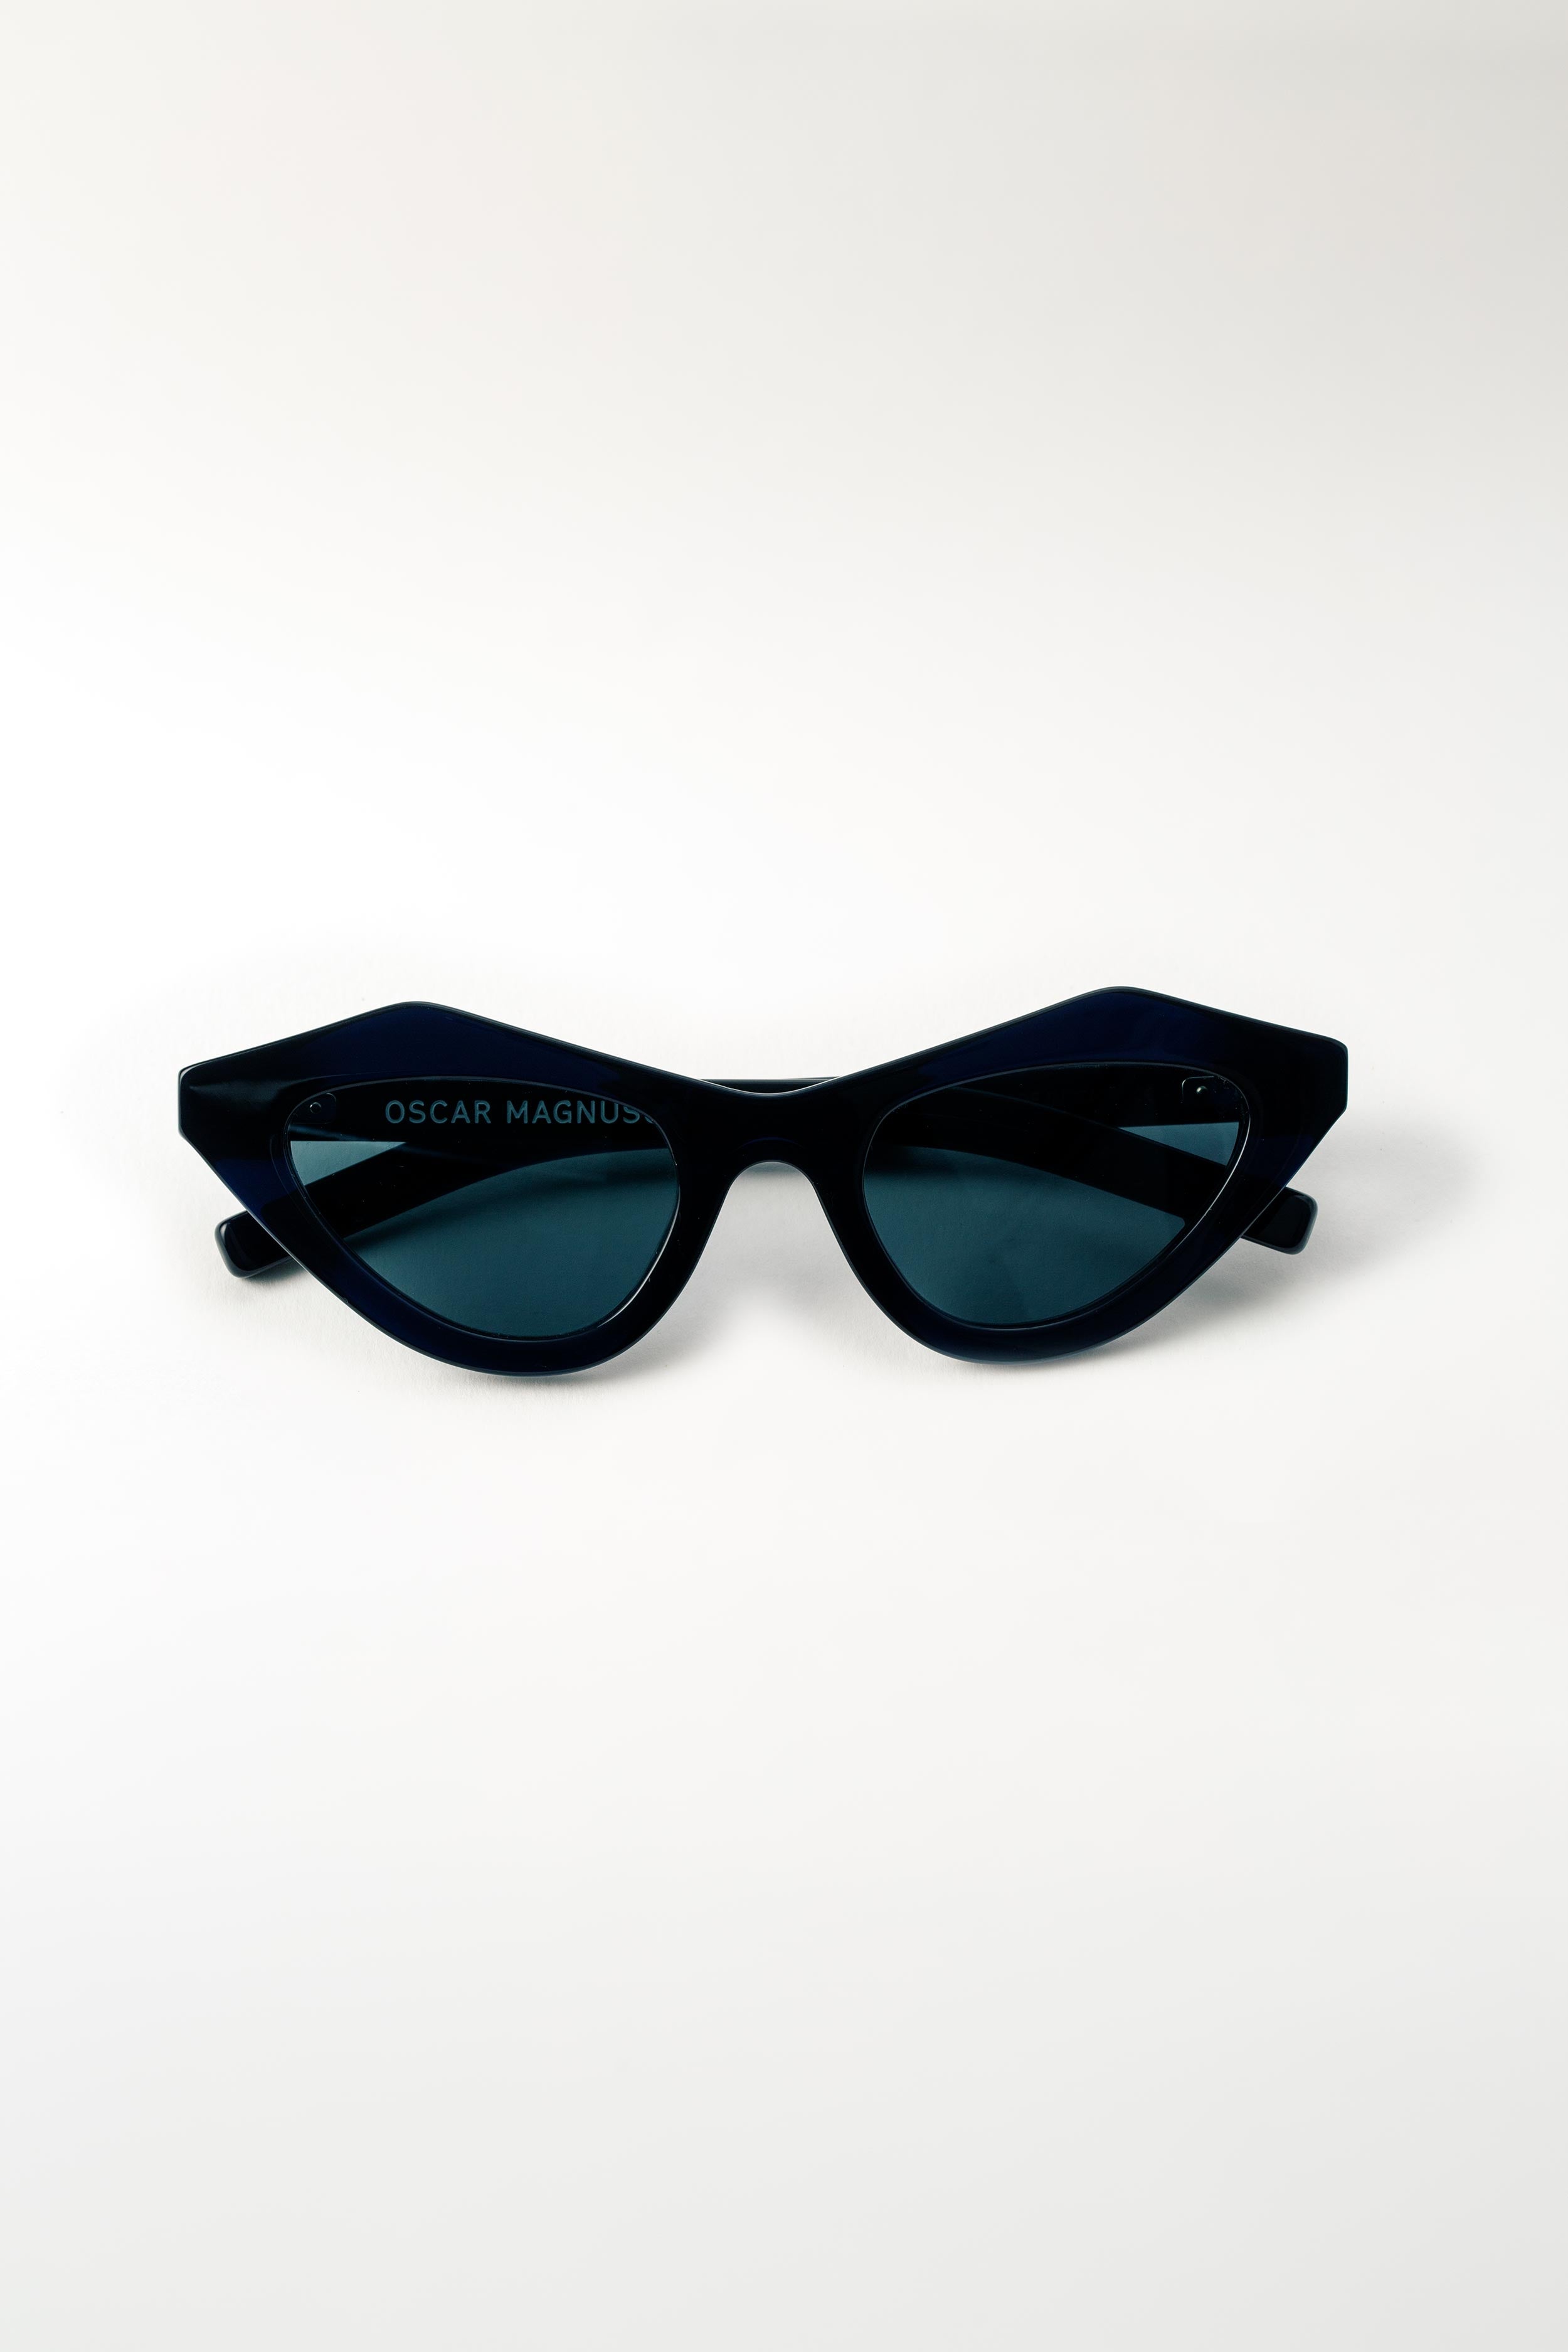 Oscar Magnuson "PRIS" sunglasses from the collection – Oscar Magnuson Spectacles